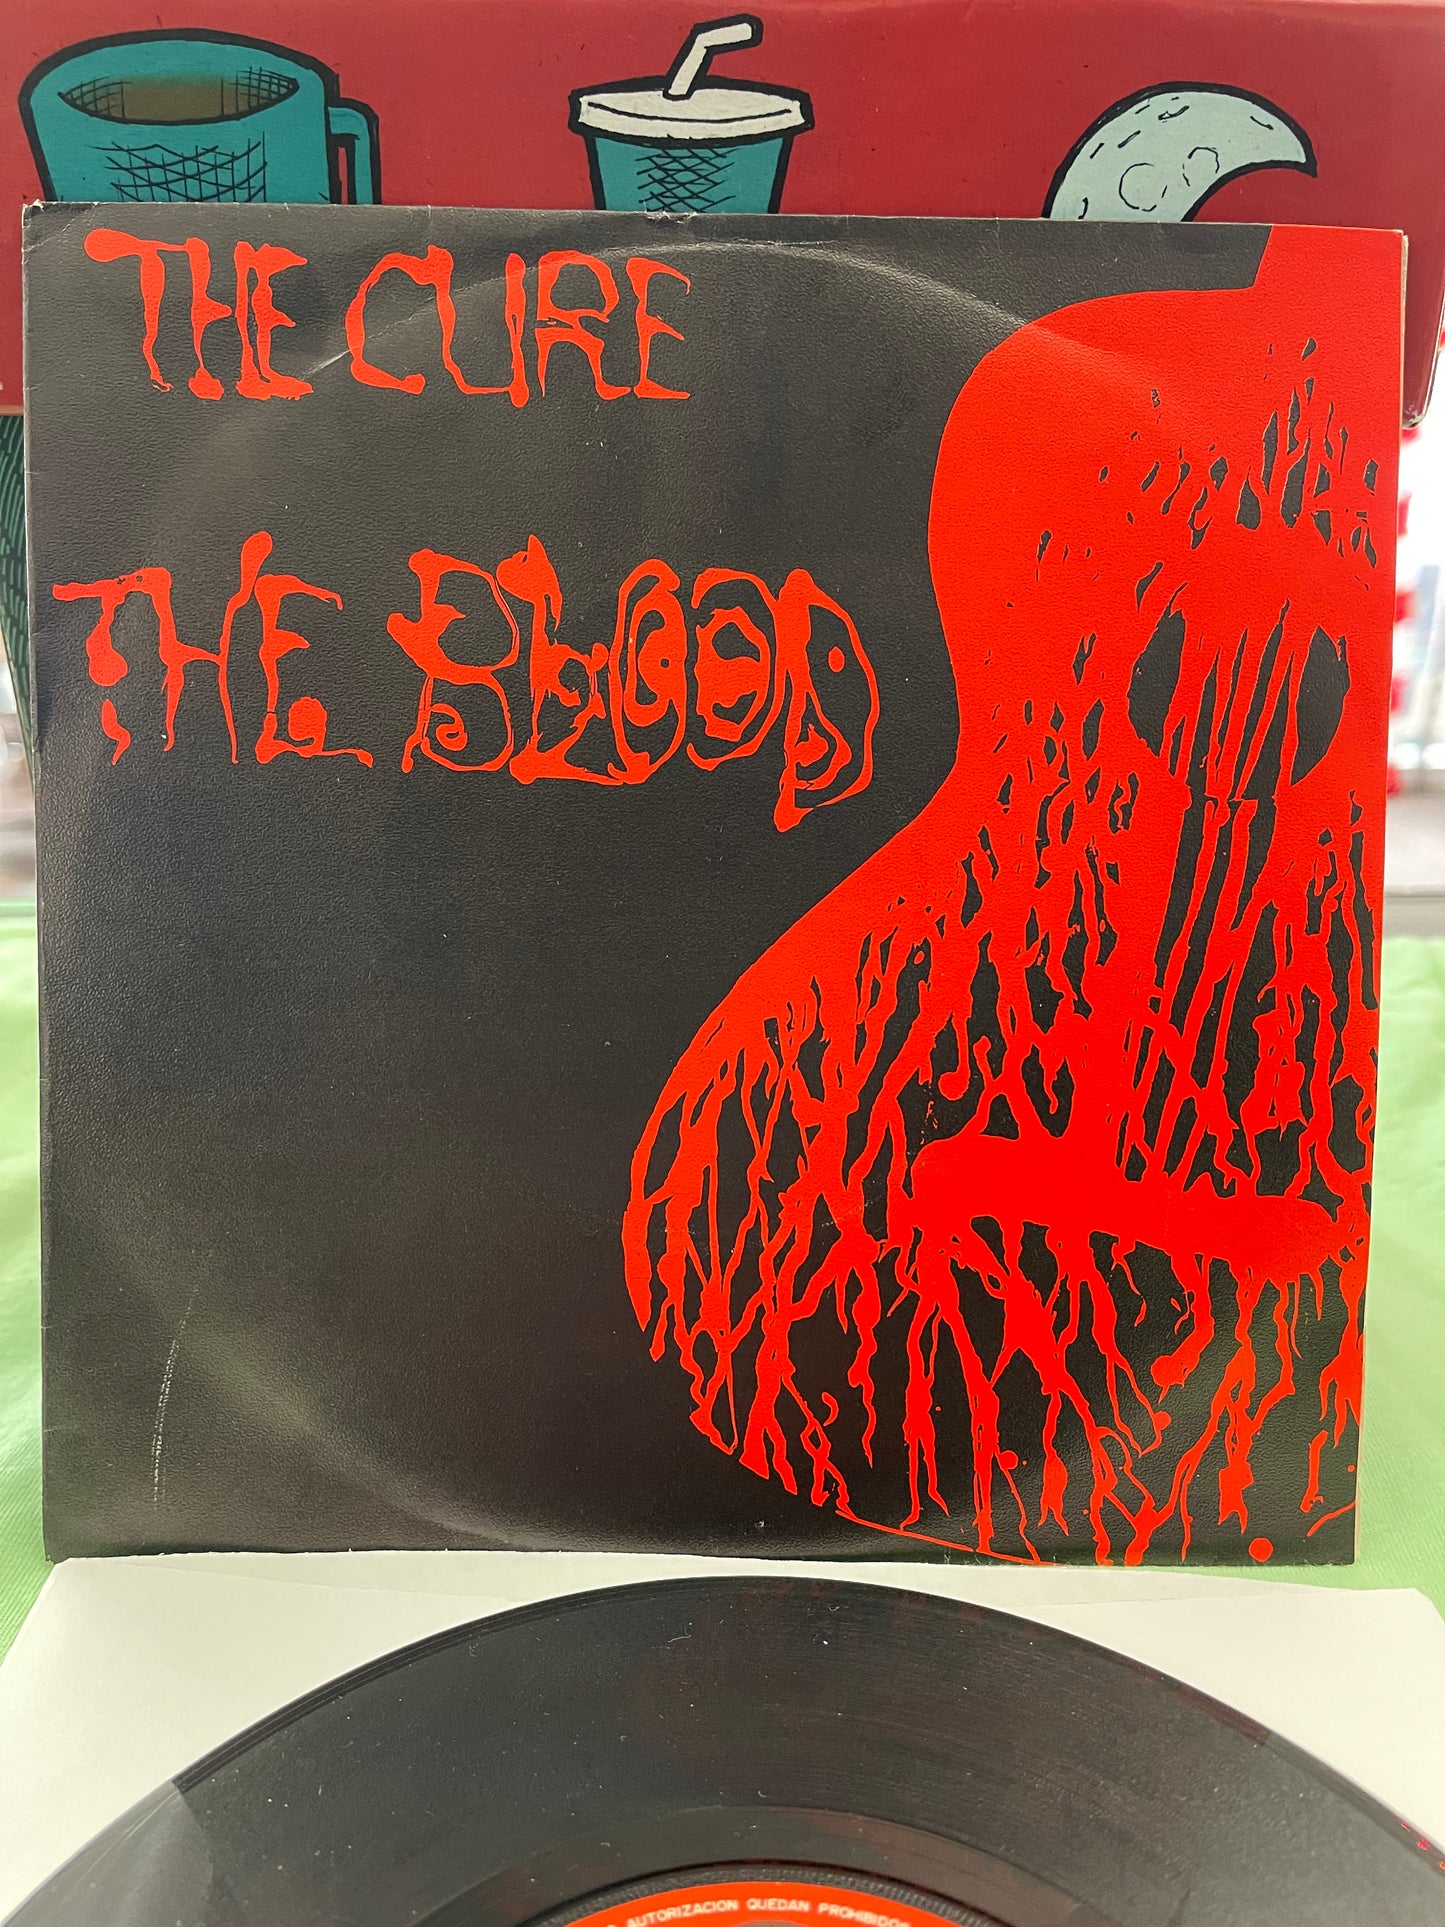 The Cure - The Blood 7” (1985 L, Spanish)